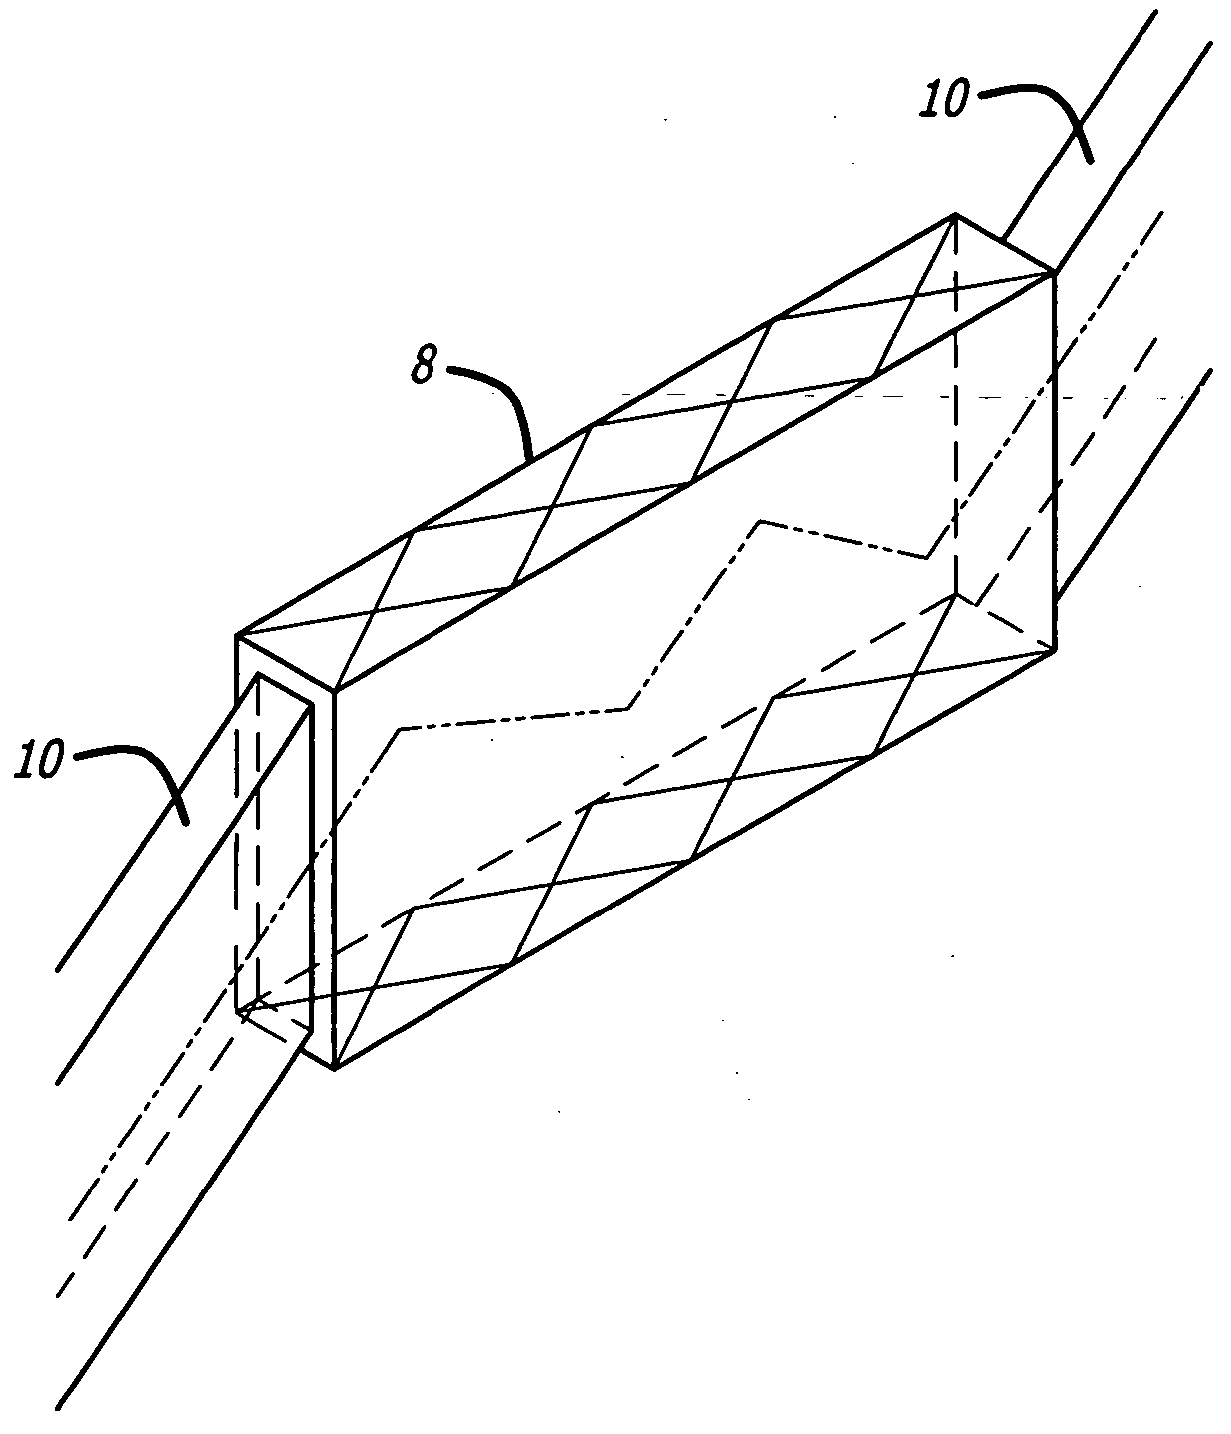 Slab laser and method with improved and directionally homogenized beam quality